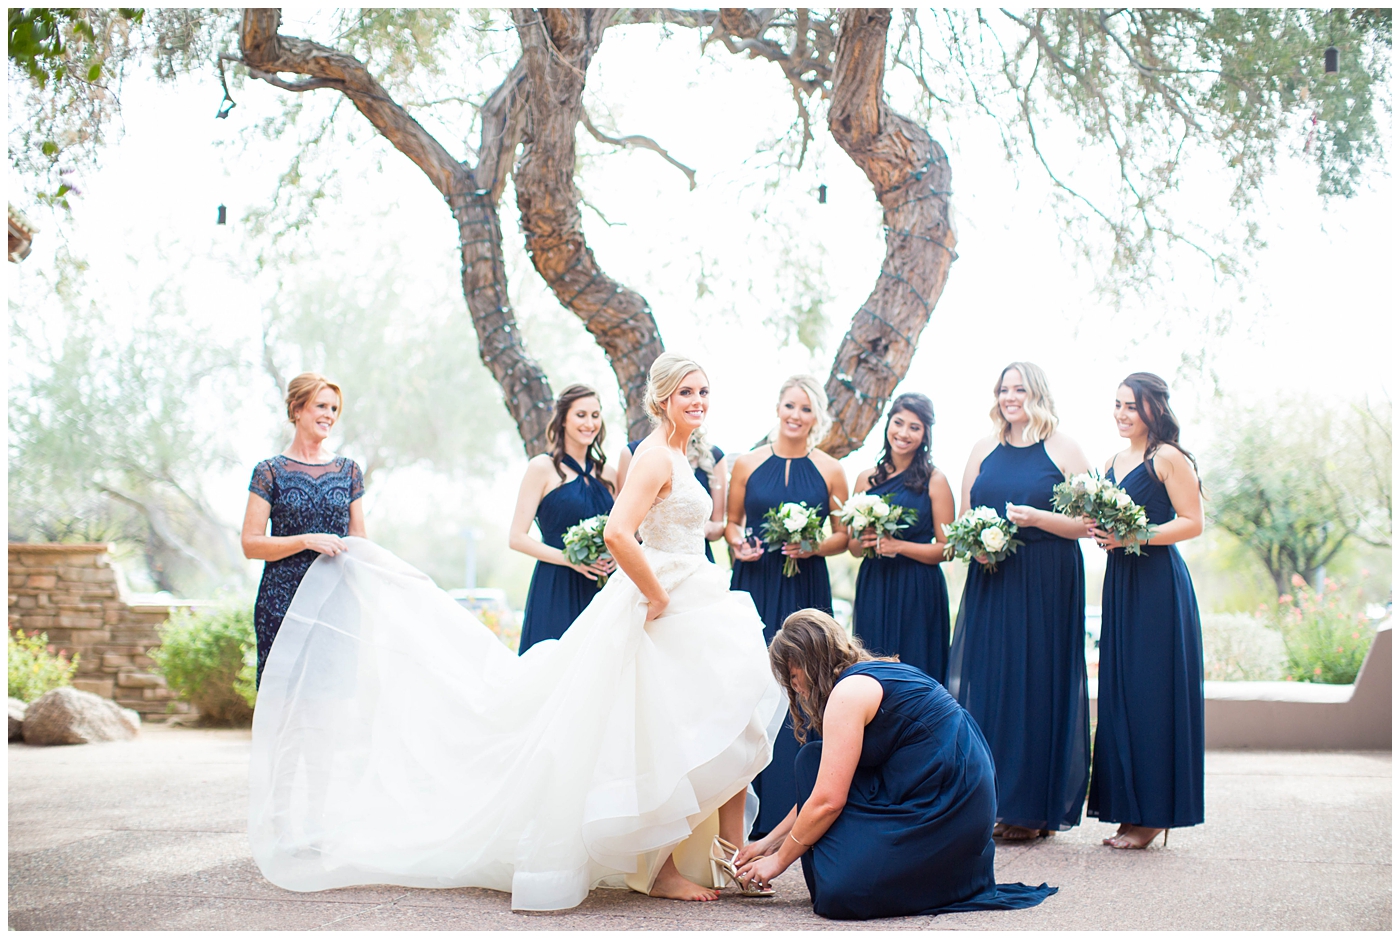 bride in backless lace wedding dress with bridesmaids in navy blue dress getting ready on wedding day